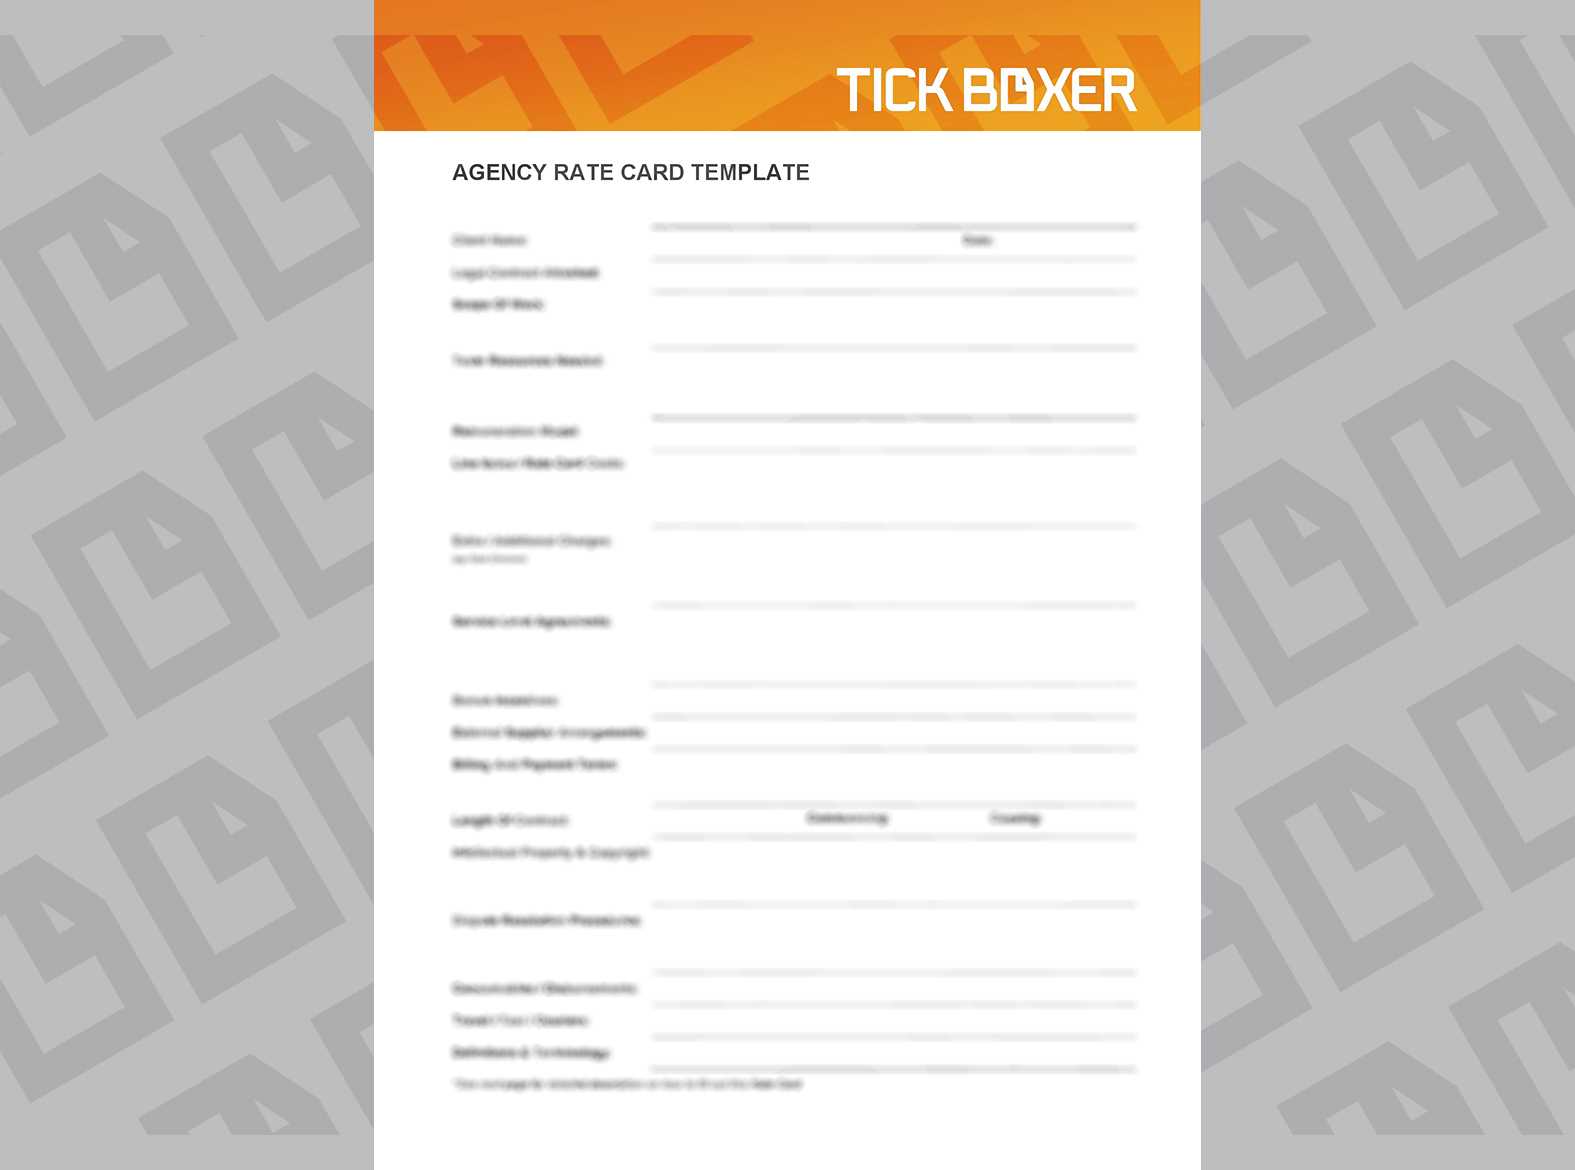 14 Images Of Ad Agency Scorecard Template | Zeept Pertaining To Advertising Rate Card Template